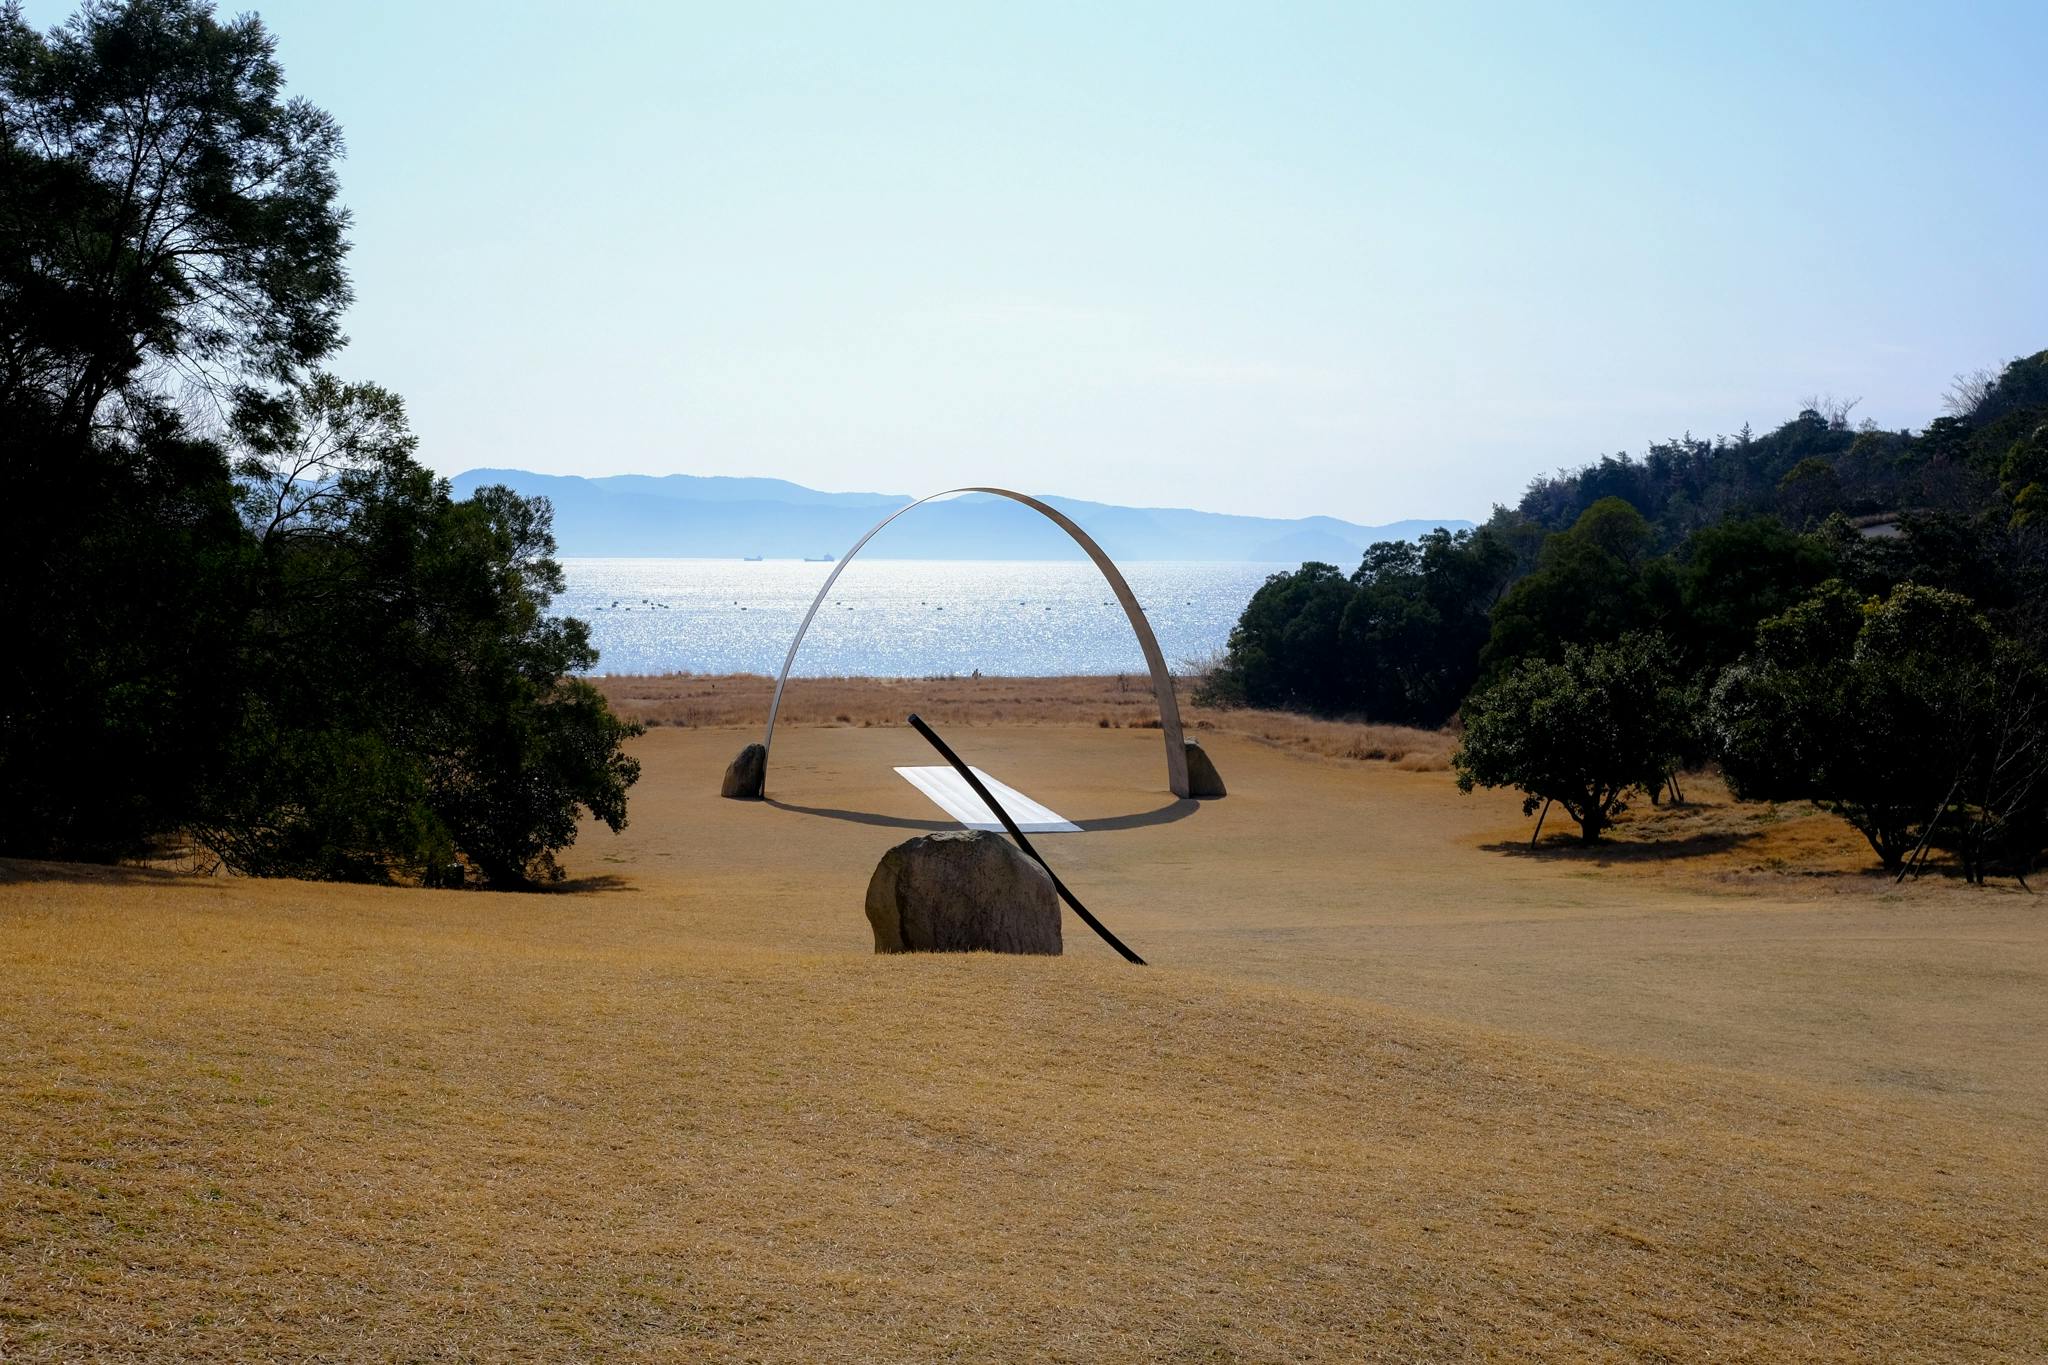 An outdoor sculpture by Lee Ufan on the lawn leading to the sea on Naoshima Island